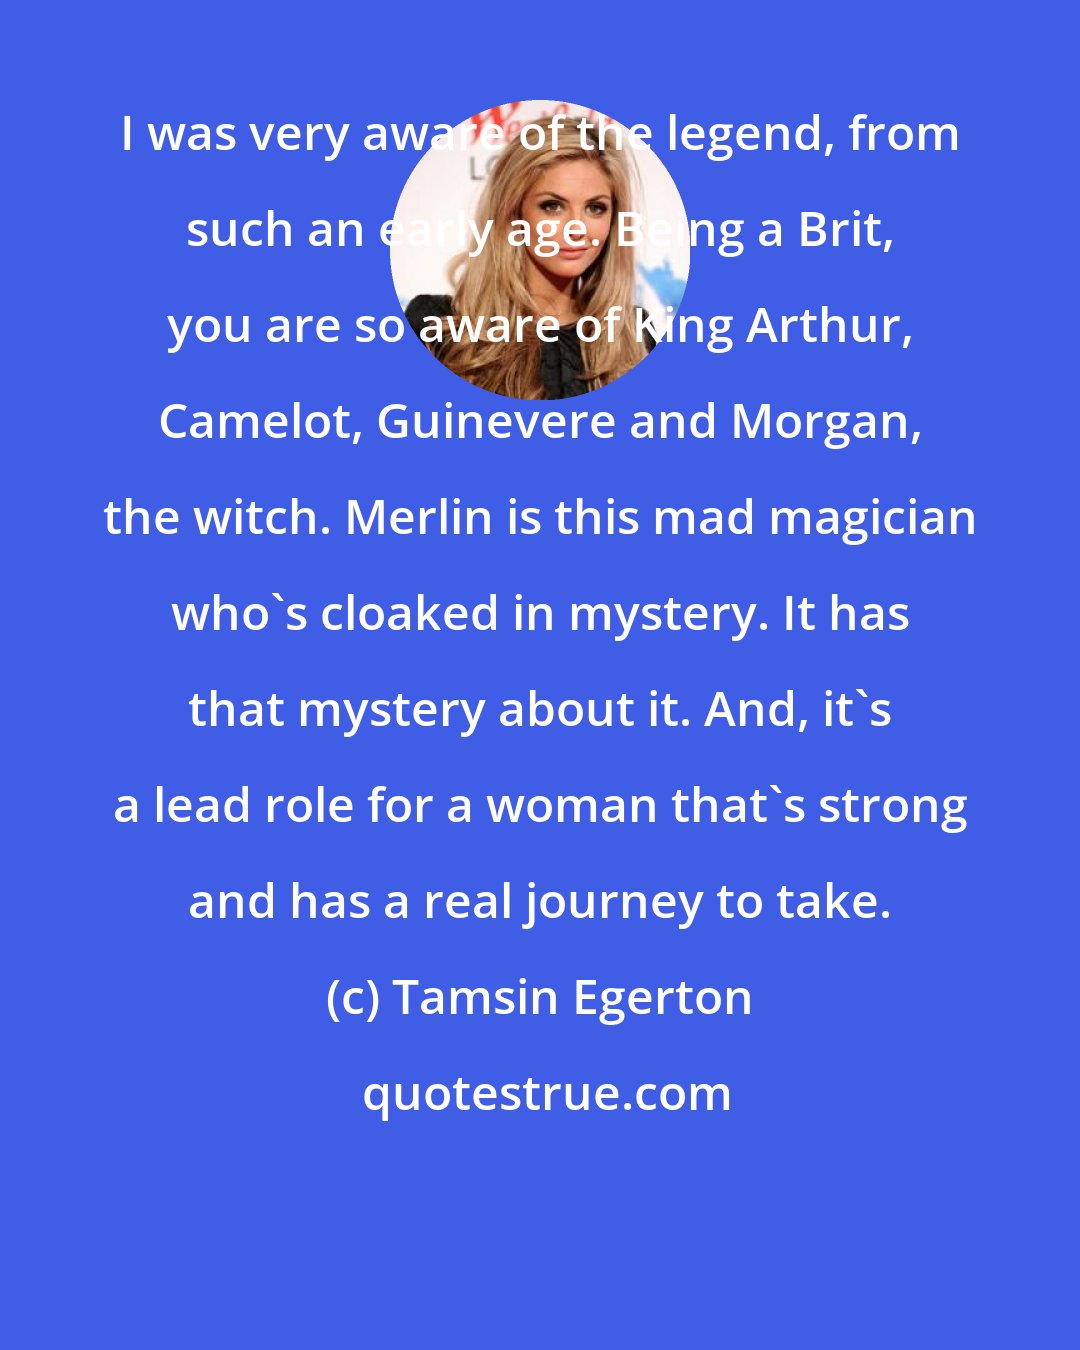 Tamsin Egerton: I was very aware of the legend, from such an early age. Being a Brit, you are so aware of King Arthur, Camelot, Guinevere and Morgan, the witch. Merlin is this mad magician who's cloaked in mystery. It has that mystery about it. And, it's a lead role for a woman that's strong and has a real journey to take.